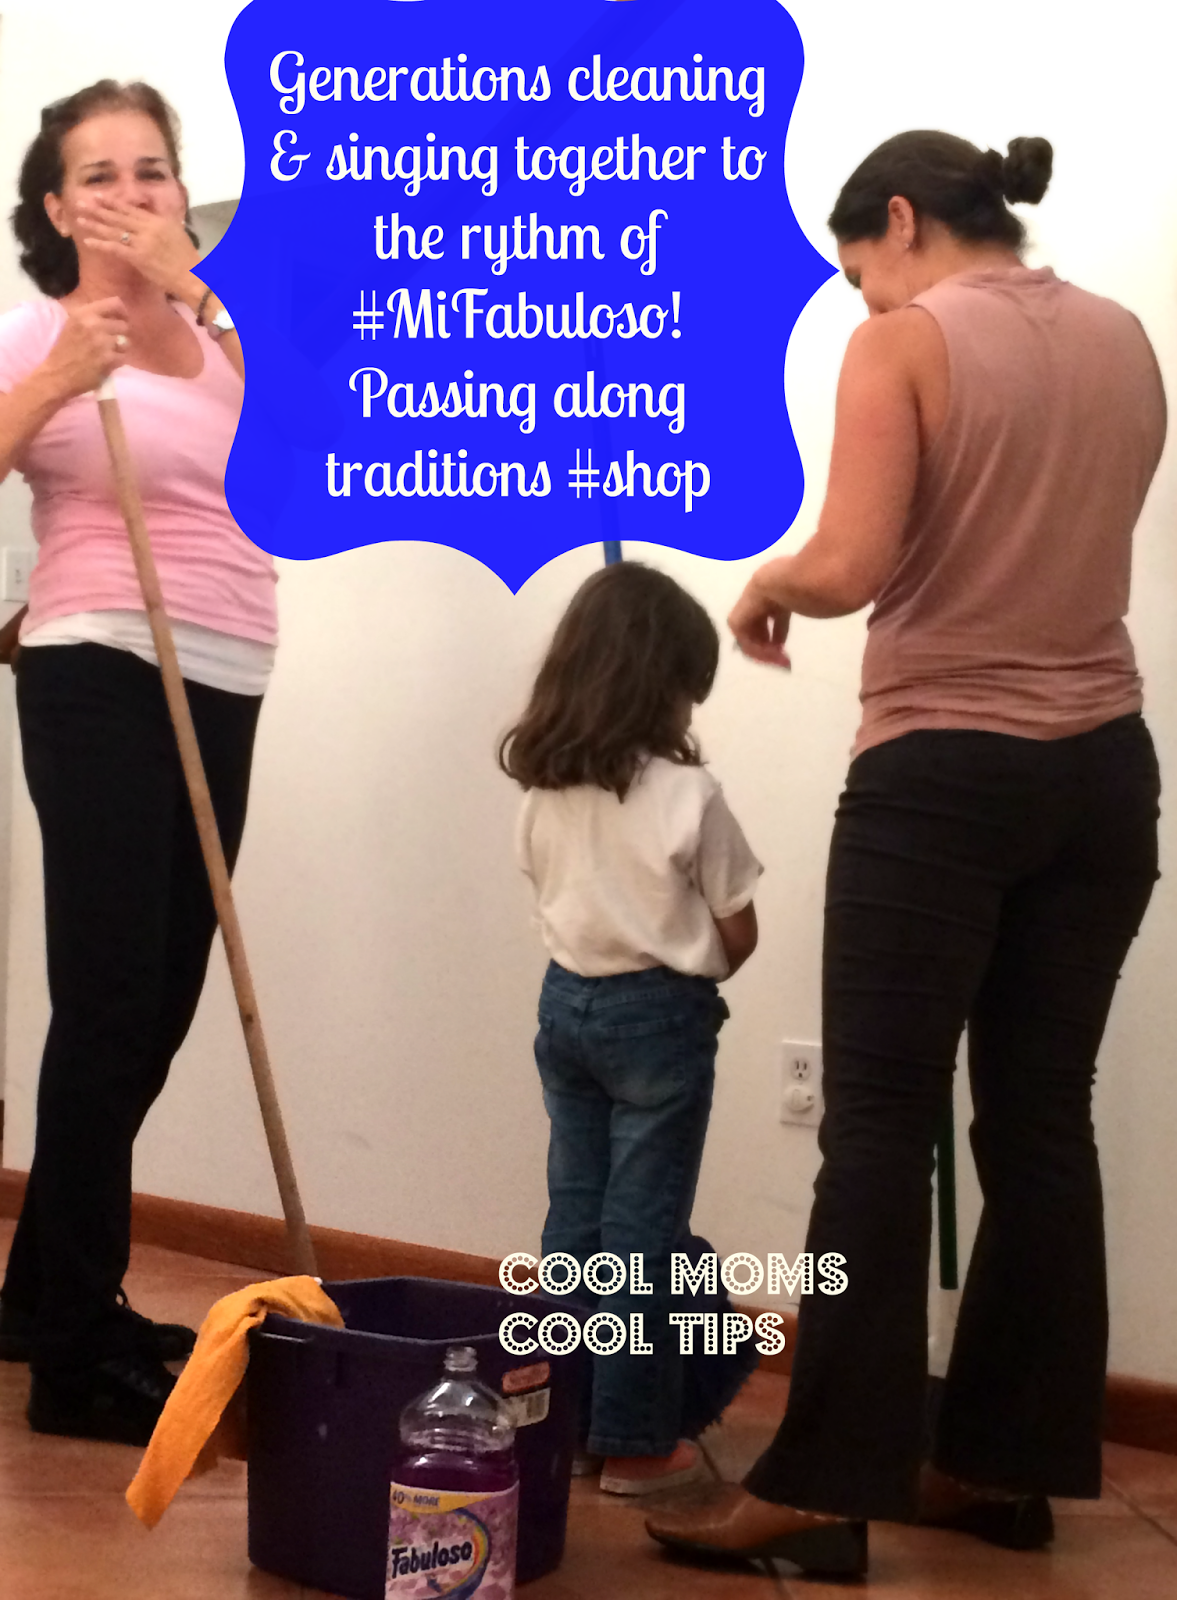 Cool Moms Cool Tips #MiFabuloso #shop #CollectiveBias family cleaning together